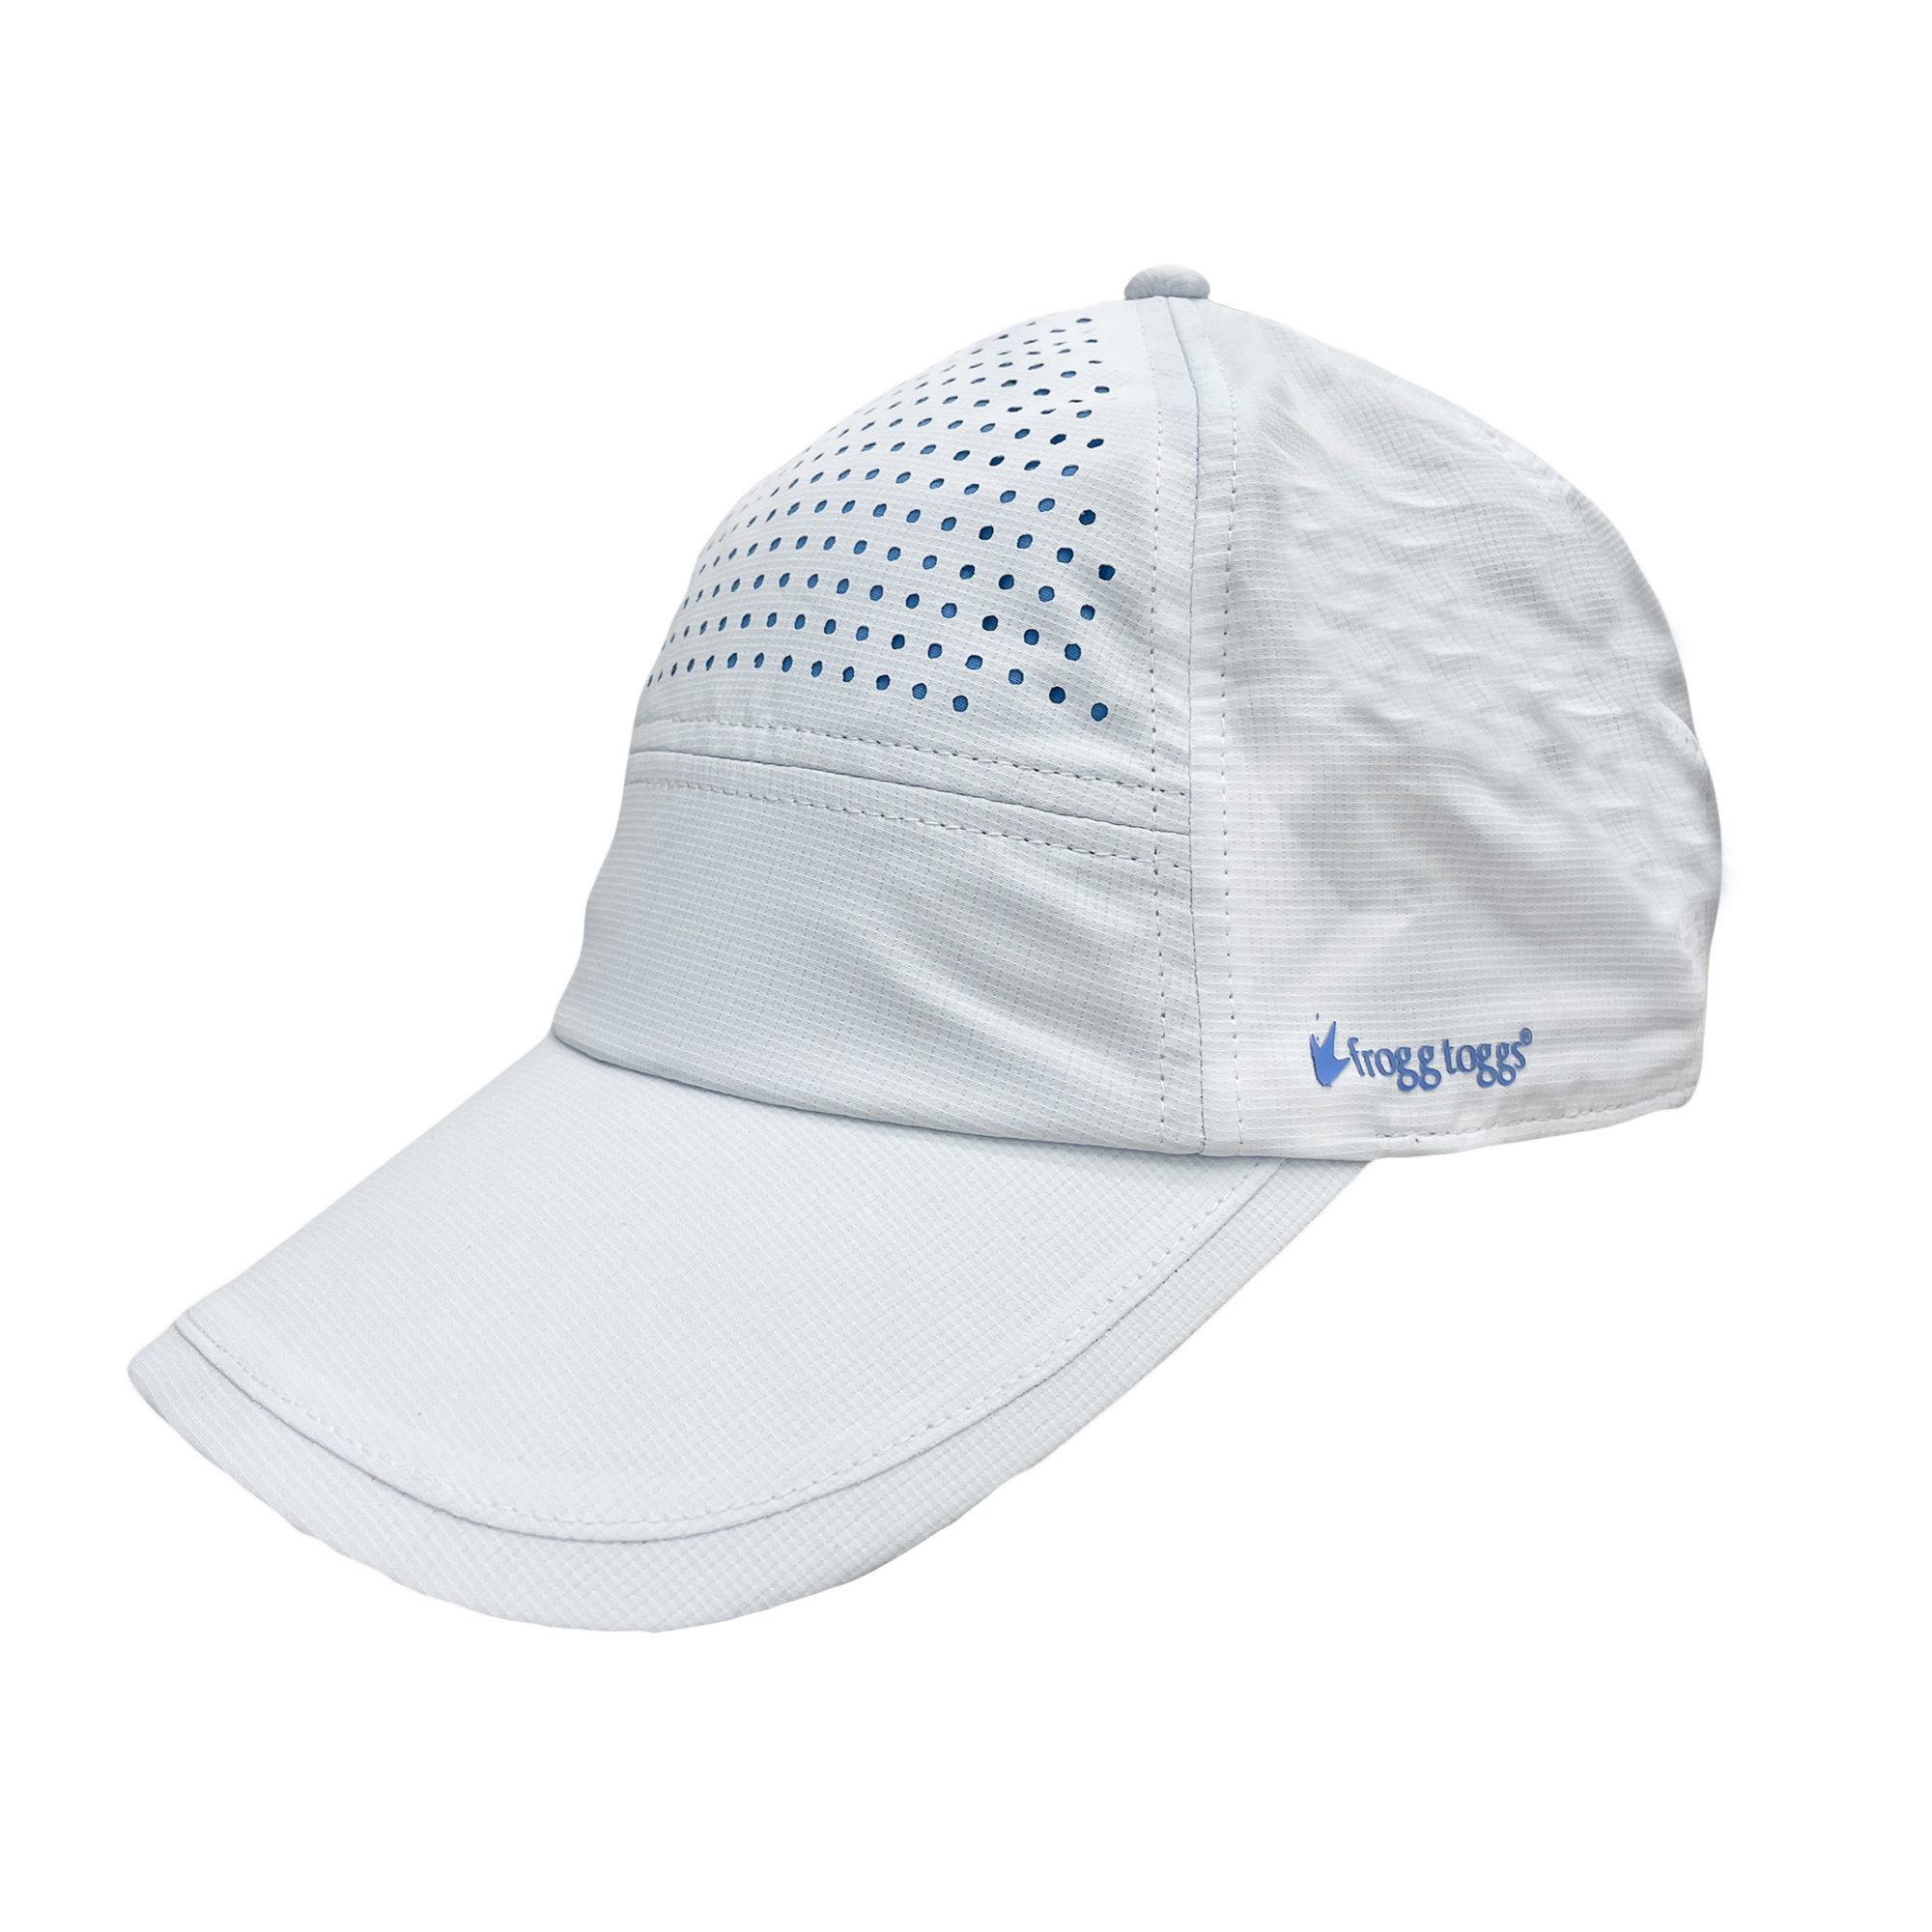 frogg toggs, Chilly Pro Performance Cooling Cap, Size One Size, Color White, Hat Style Hat, Model 6CCP21-100